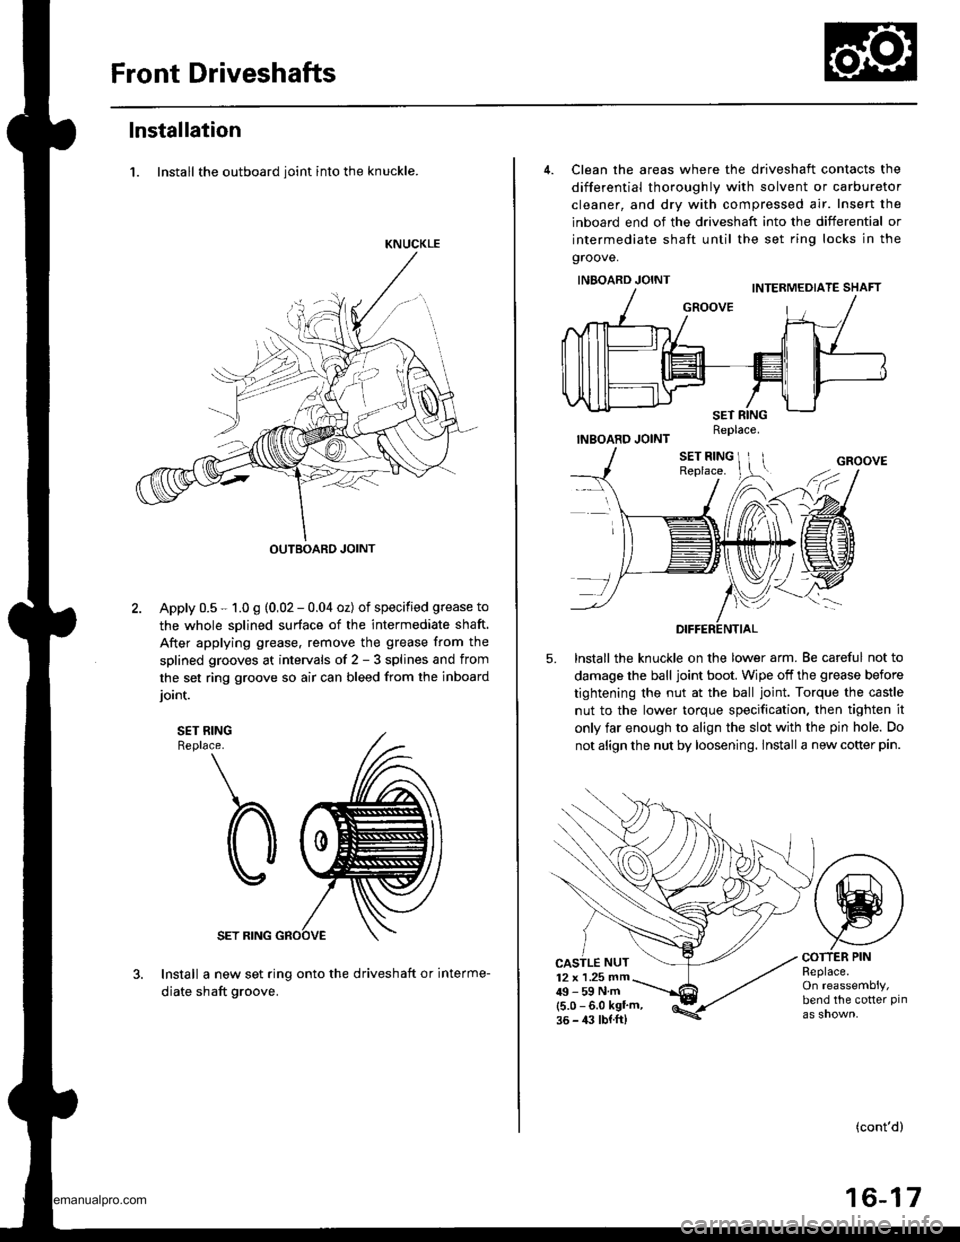 HONDA CR-V 1999 RD1-RD3 / 1.G User Guide 
Front Driveshafts
lnstallation
1. Install the outboard ioint into the knuckle.
KNUCKLE
OUTBOARD JOINT
Apply 0.5 - 1.0 g (0,02 - 0.04 oz) of specified grease to
the whole sDlined surface of the interm